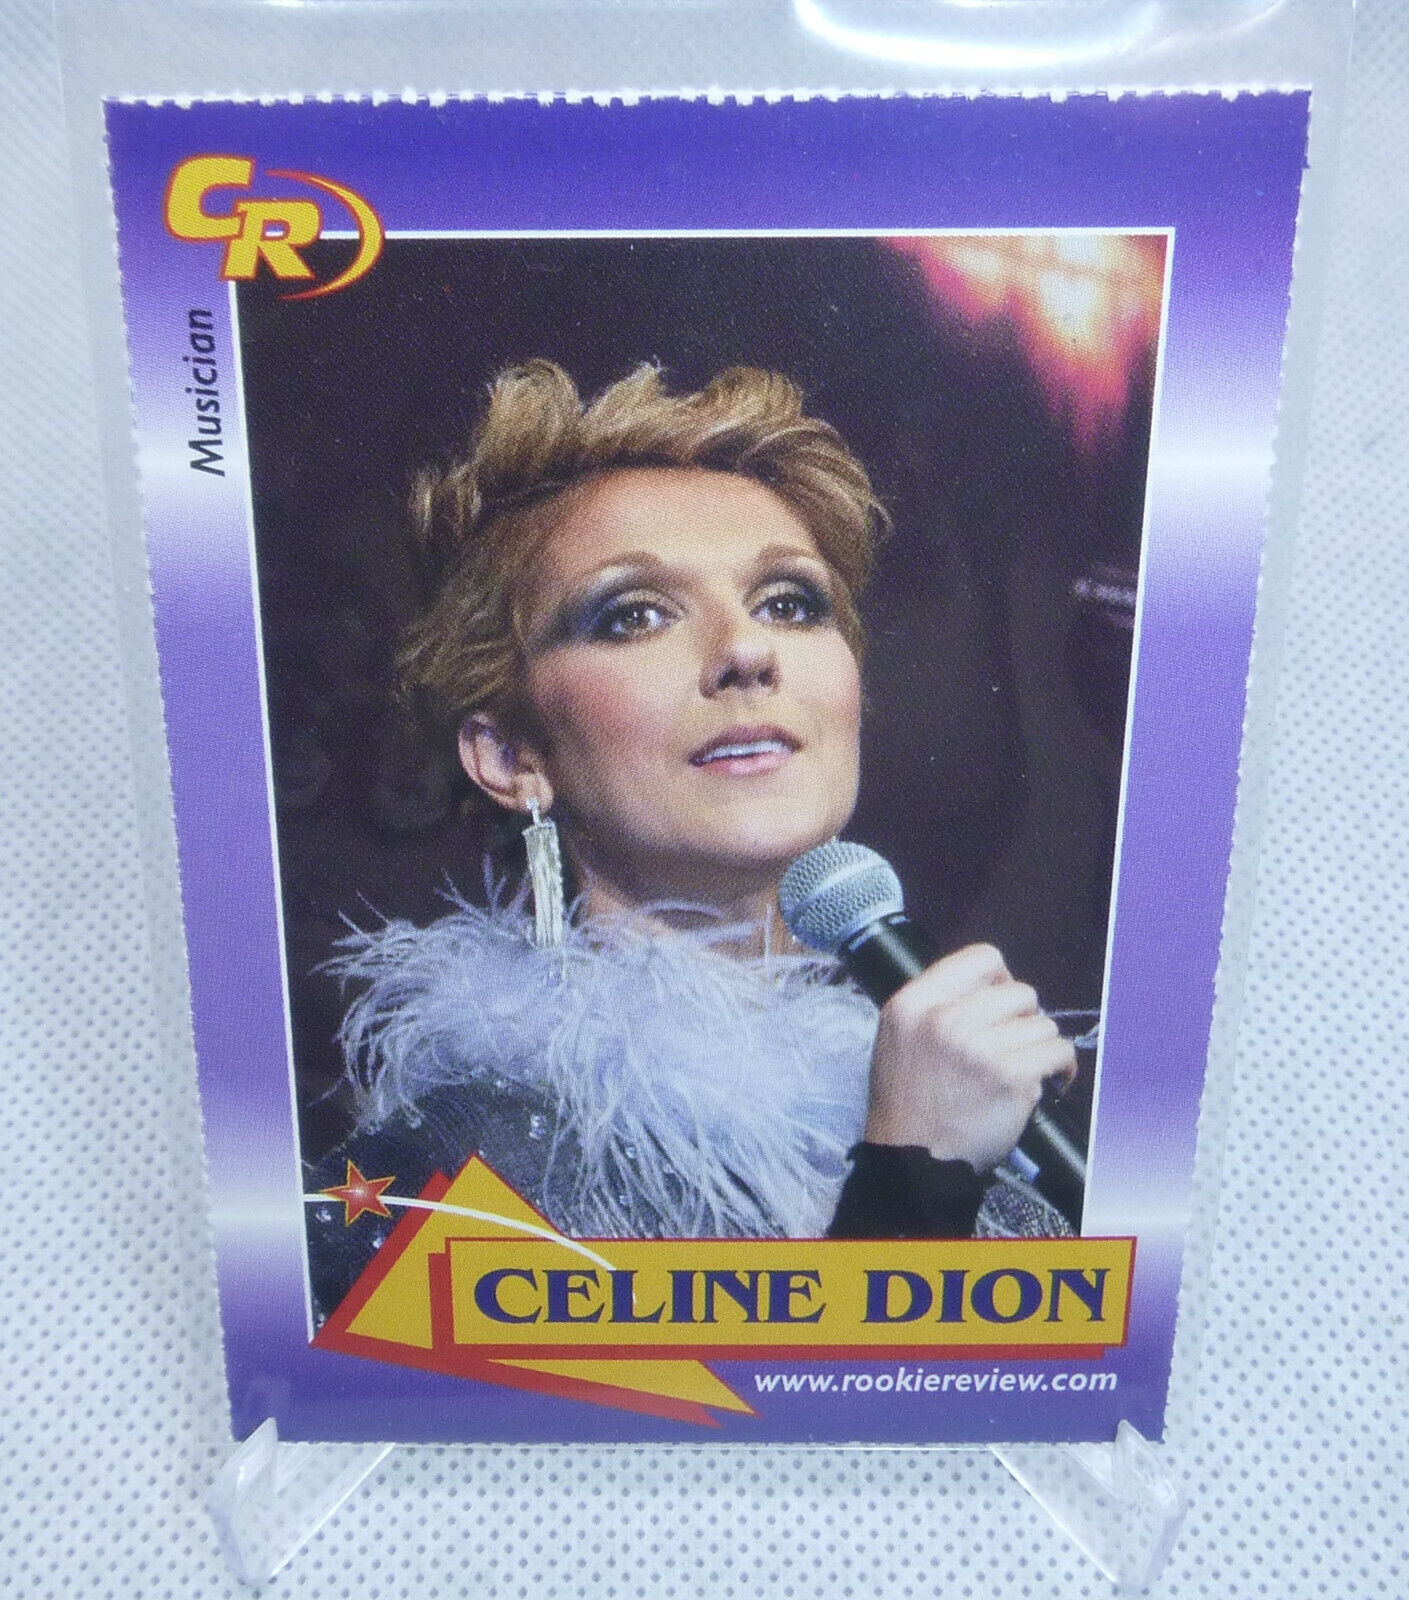 2003 Celebrity Review Rookie Review Celine Dion Singer Musician Card #5